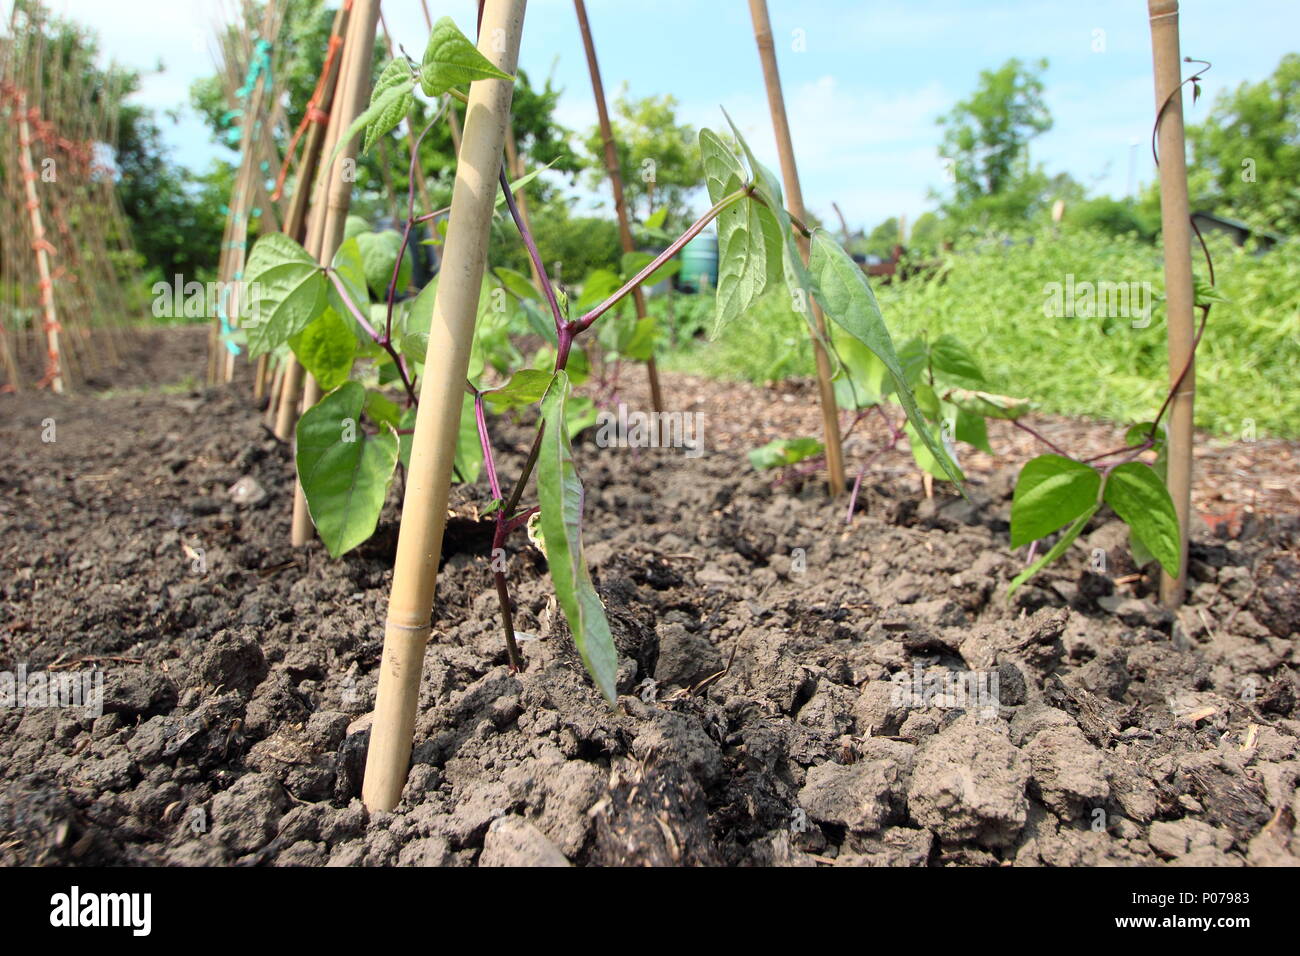 Phaseolus coccineus. Young runner bean plants climbing up cane support frame in English kitchen garden, UK Stock Photo